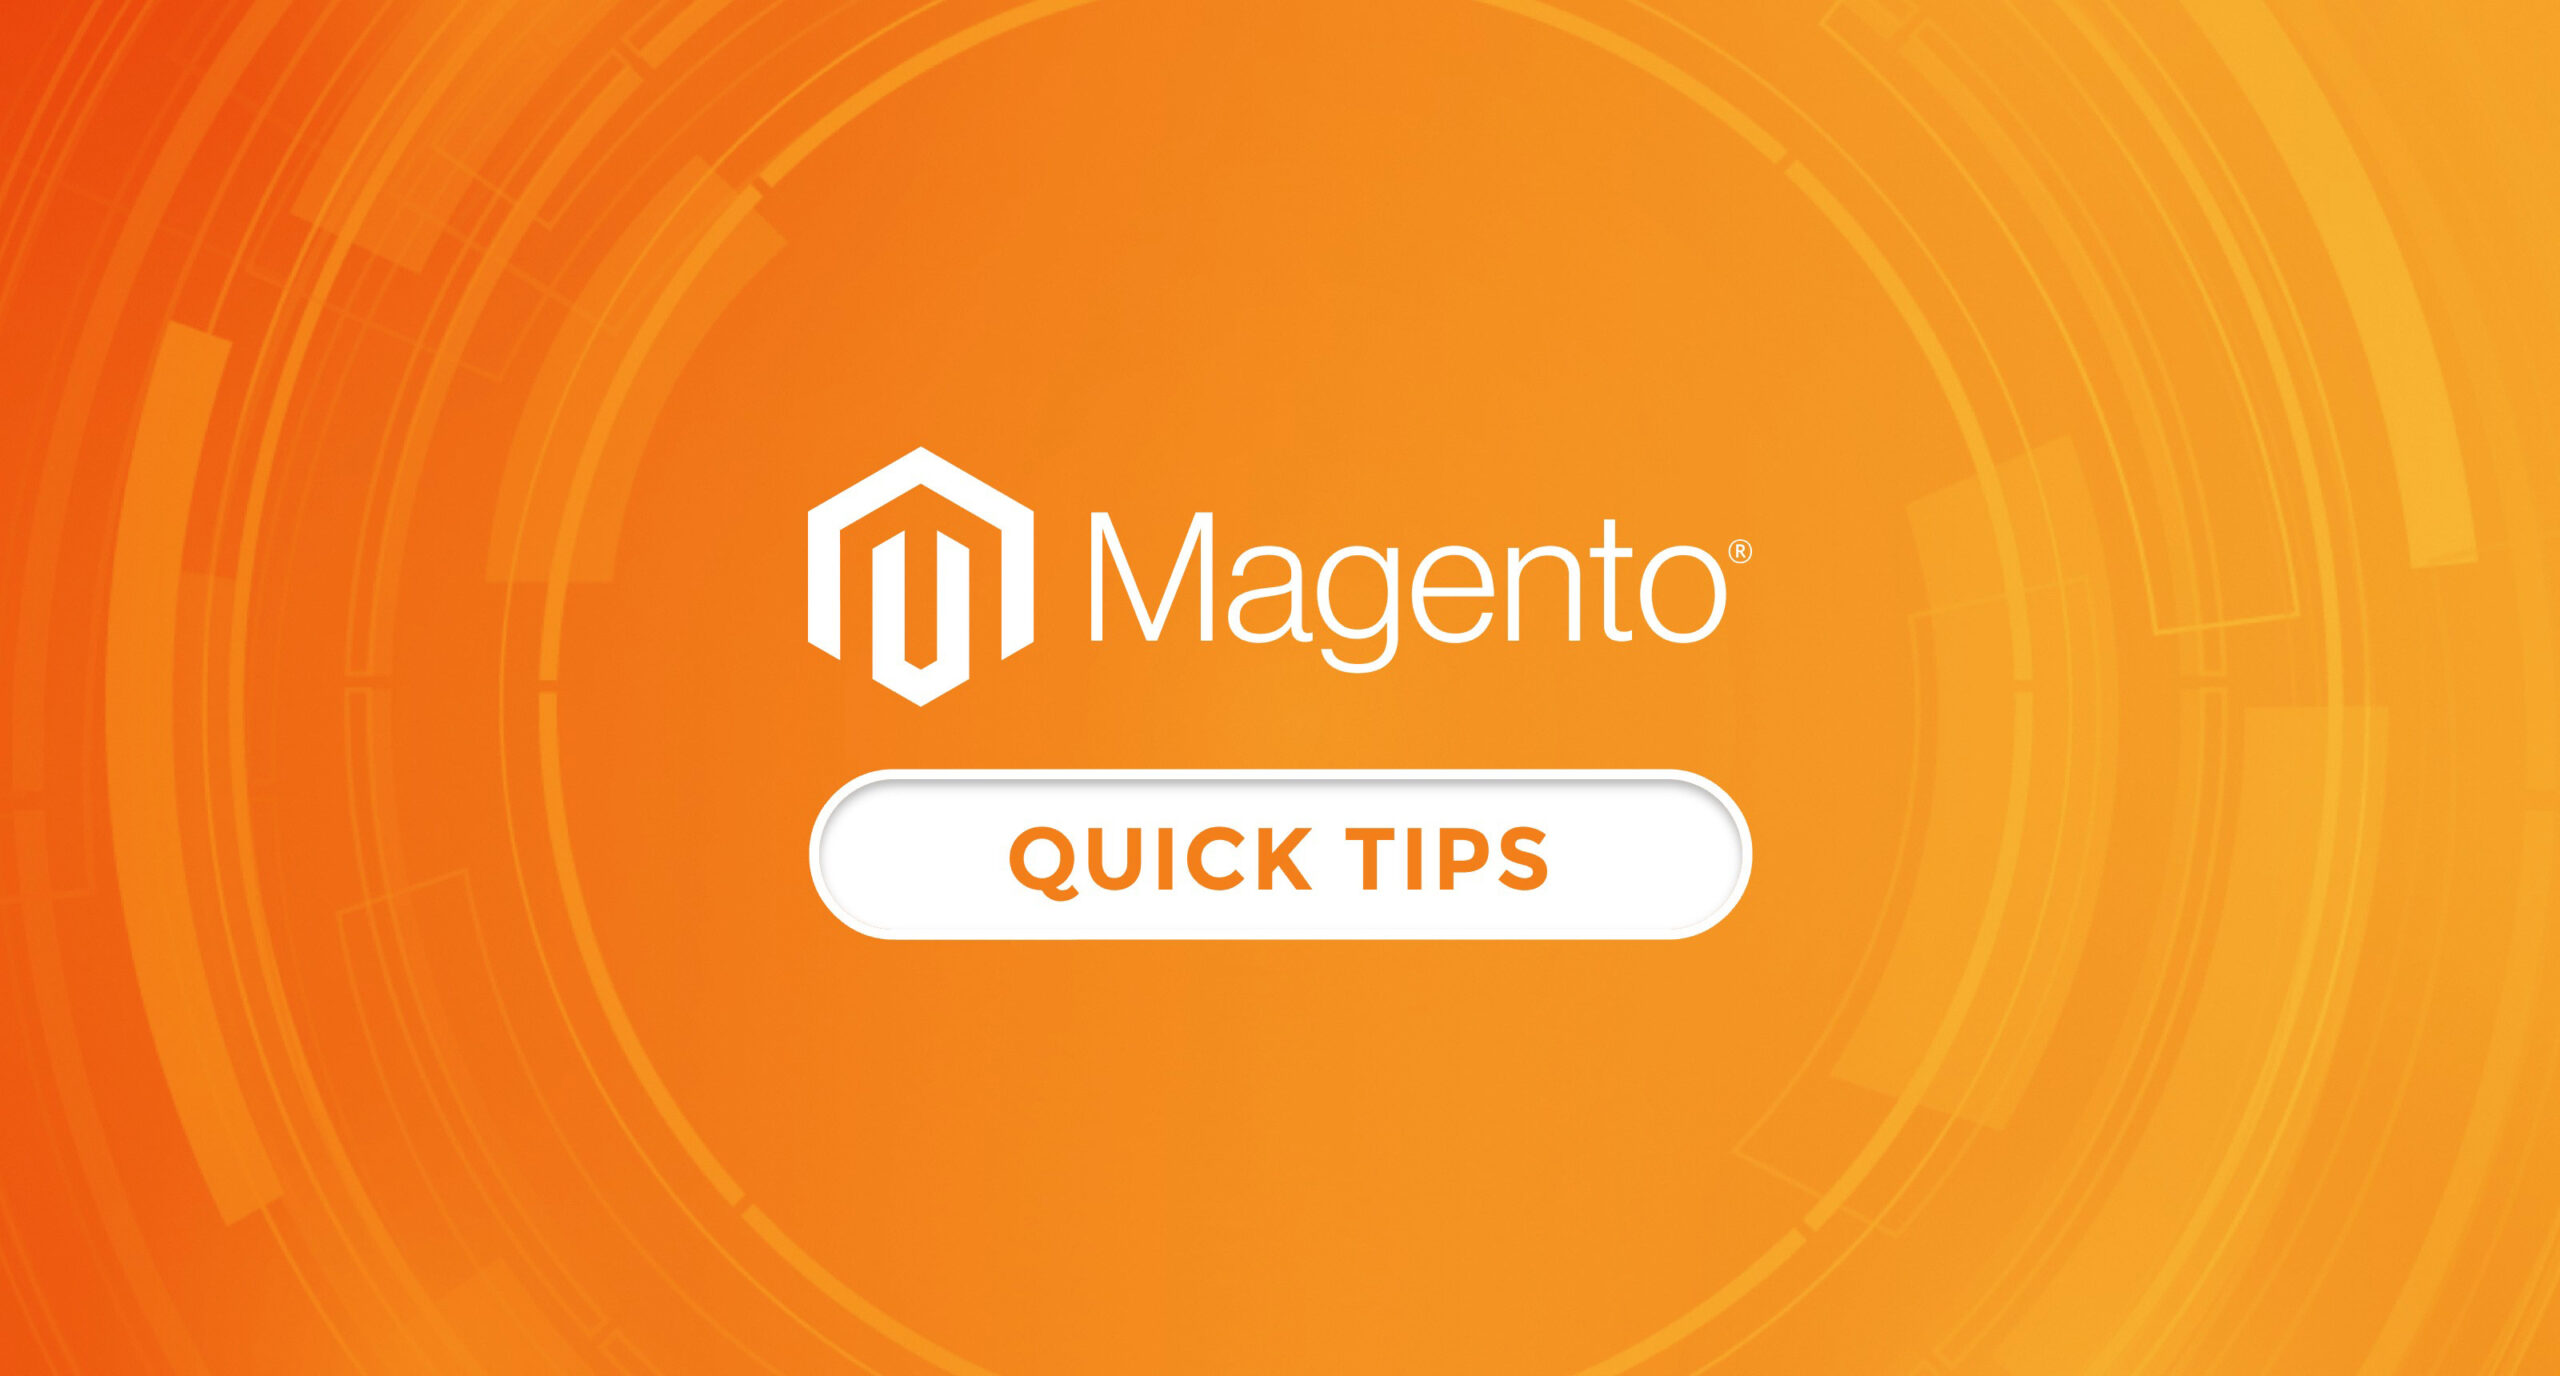 6 Quick Tips for Magento On-Page Product Optimization